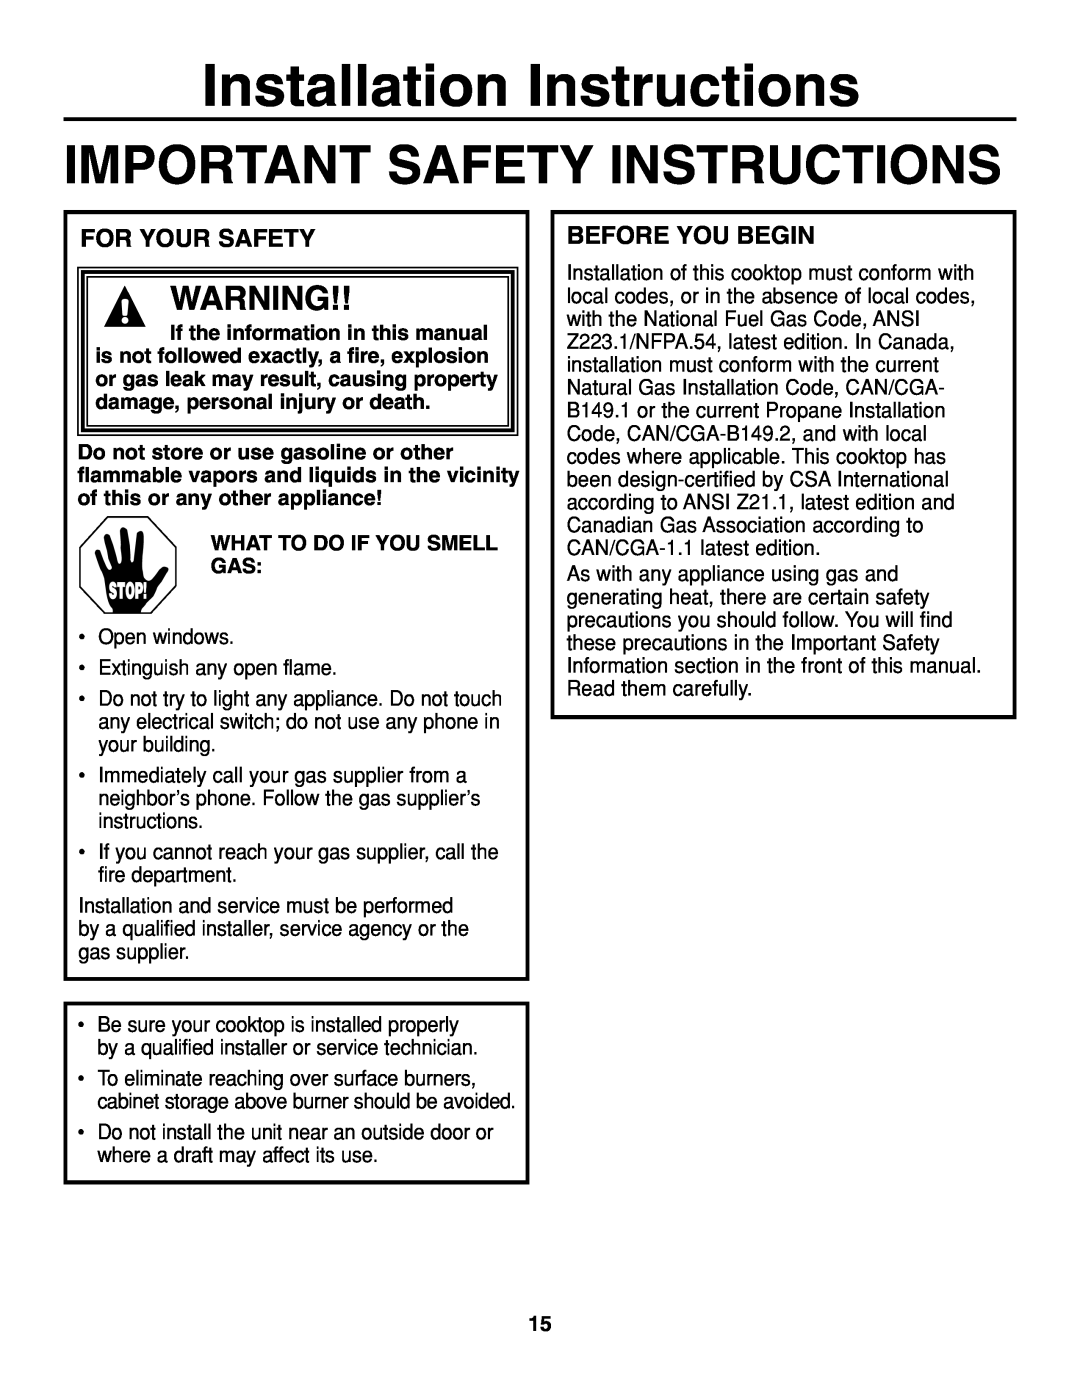 GE JGP637 Installation Instructions, Important Safety Instructions, For Your Safety, Before You Begin, Stop 